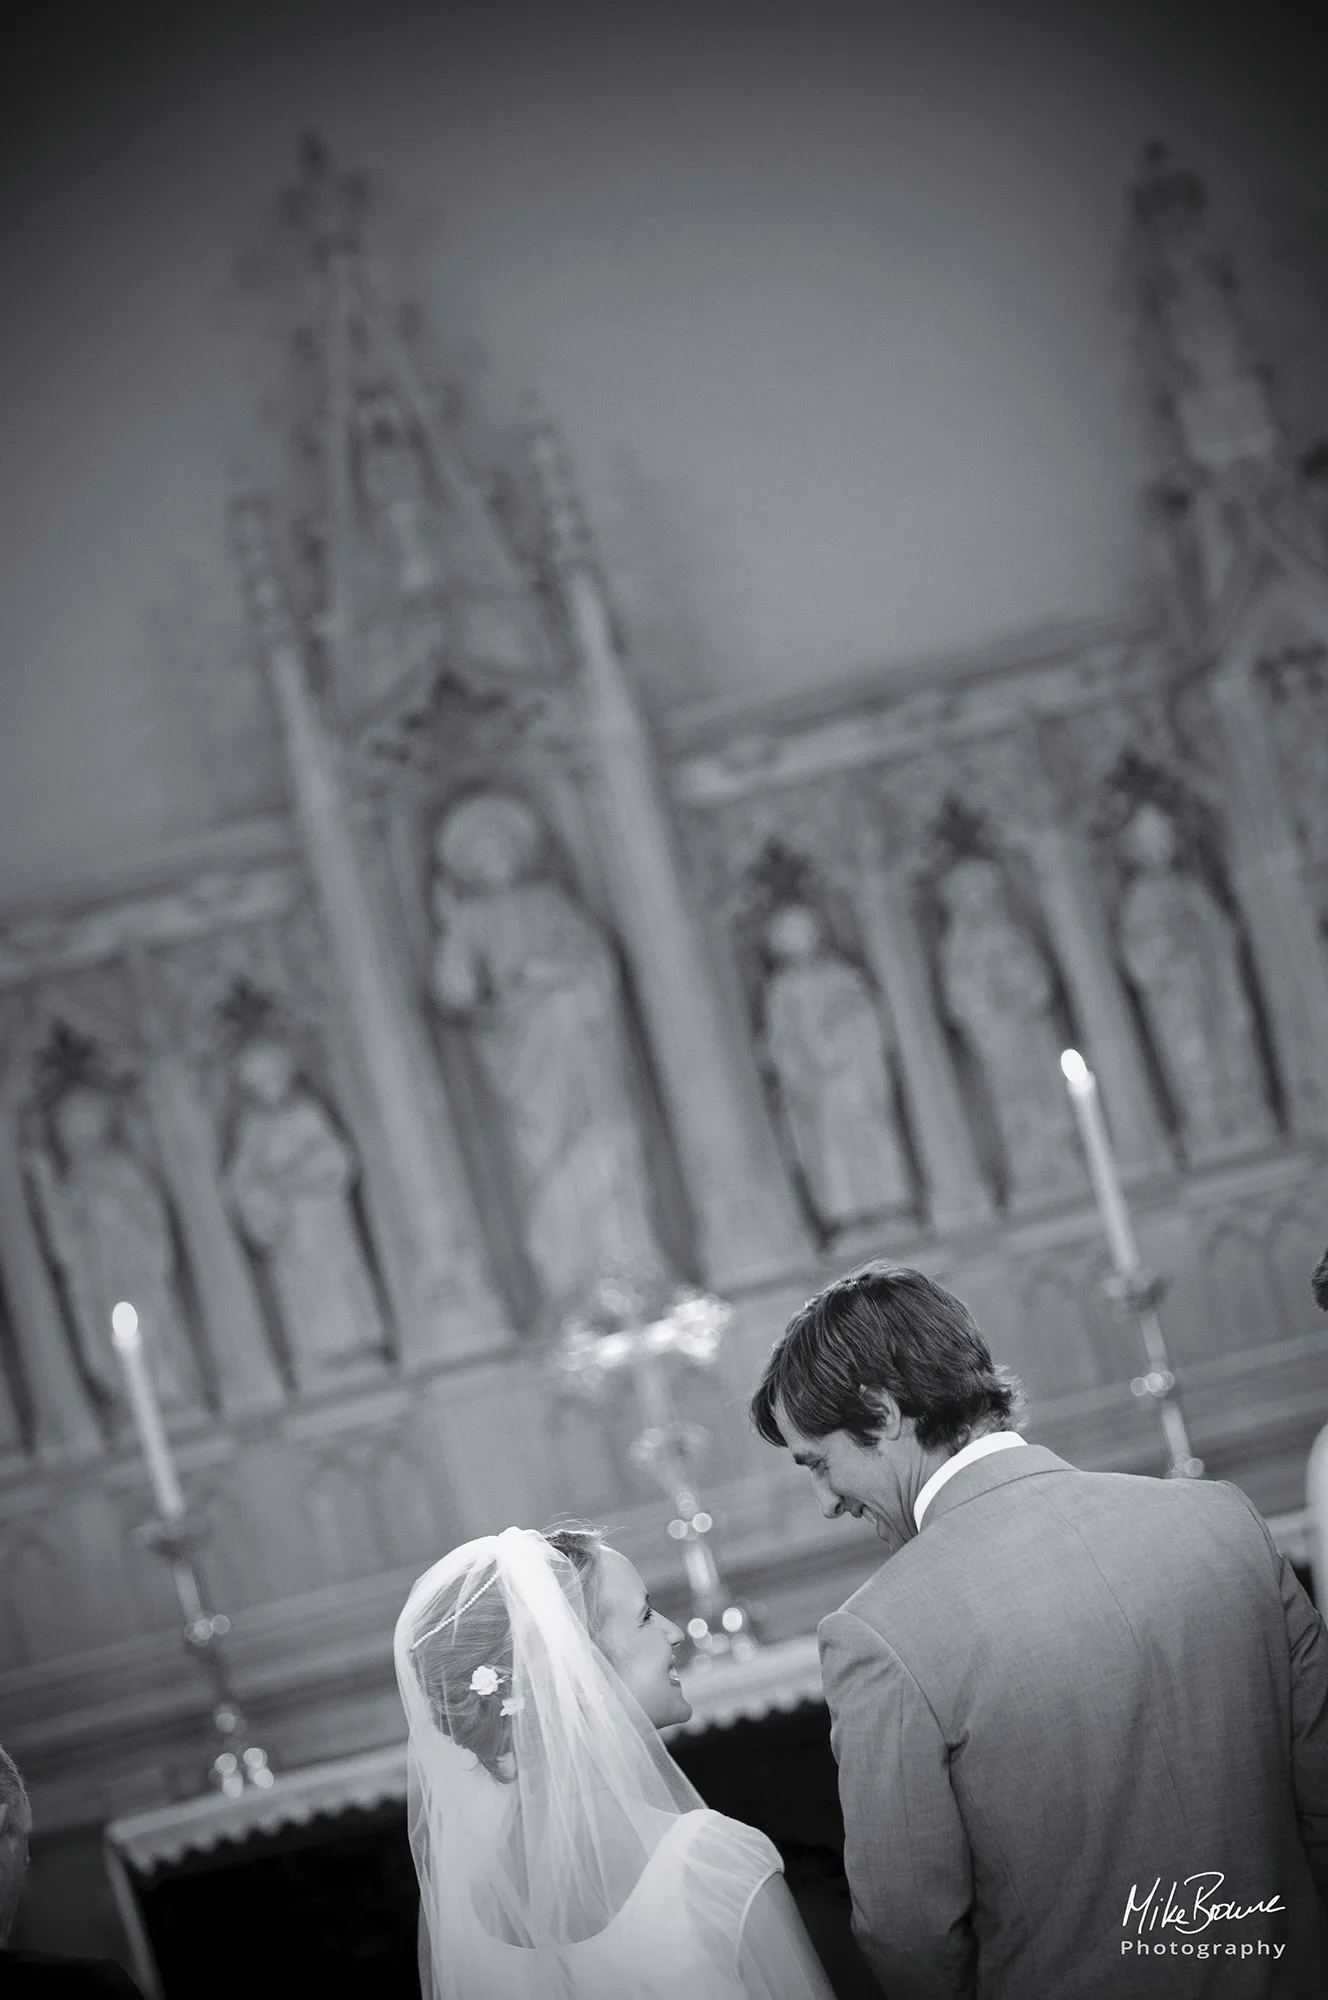 wedding couple turn and laugh together with church alter and candles beyond